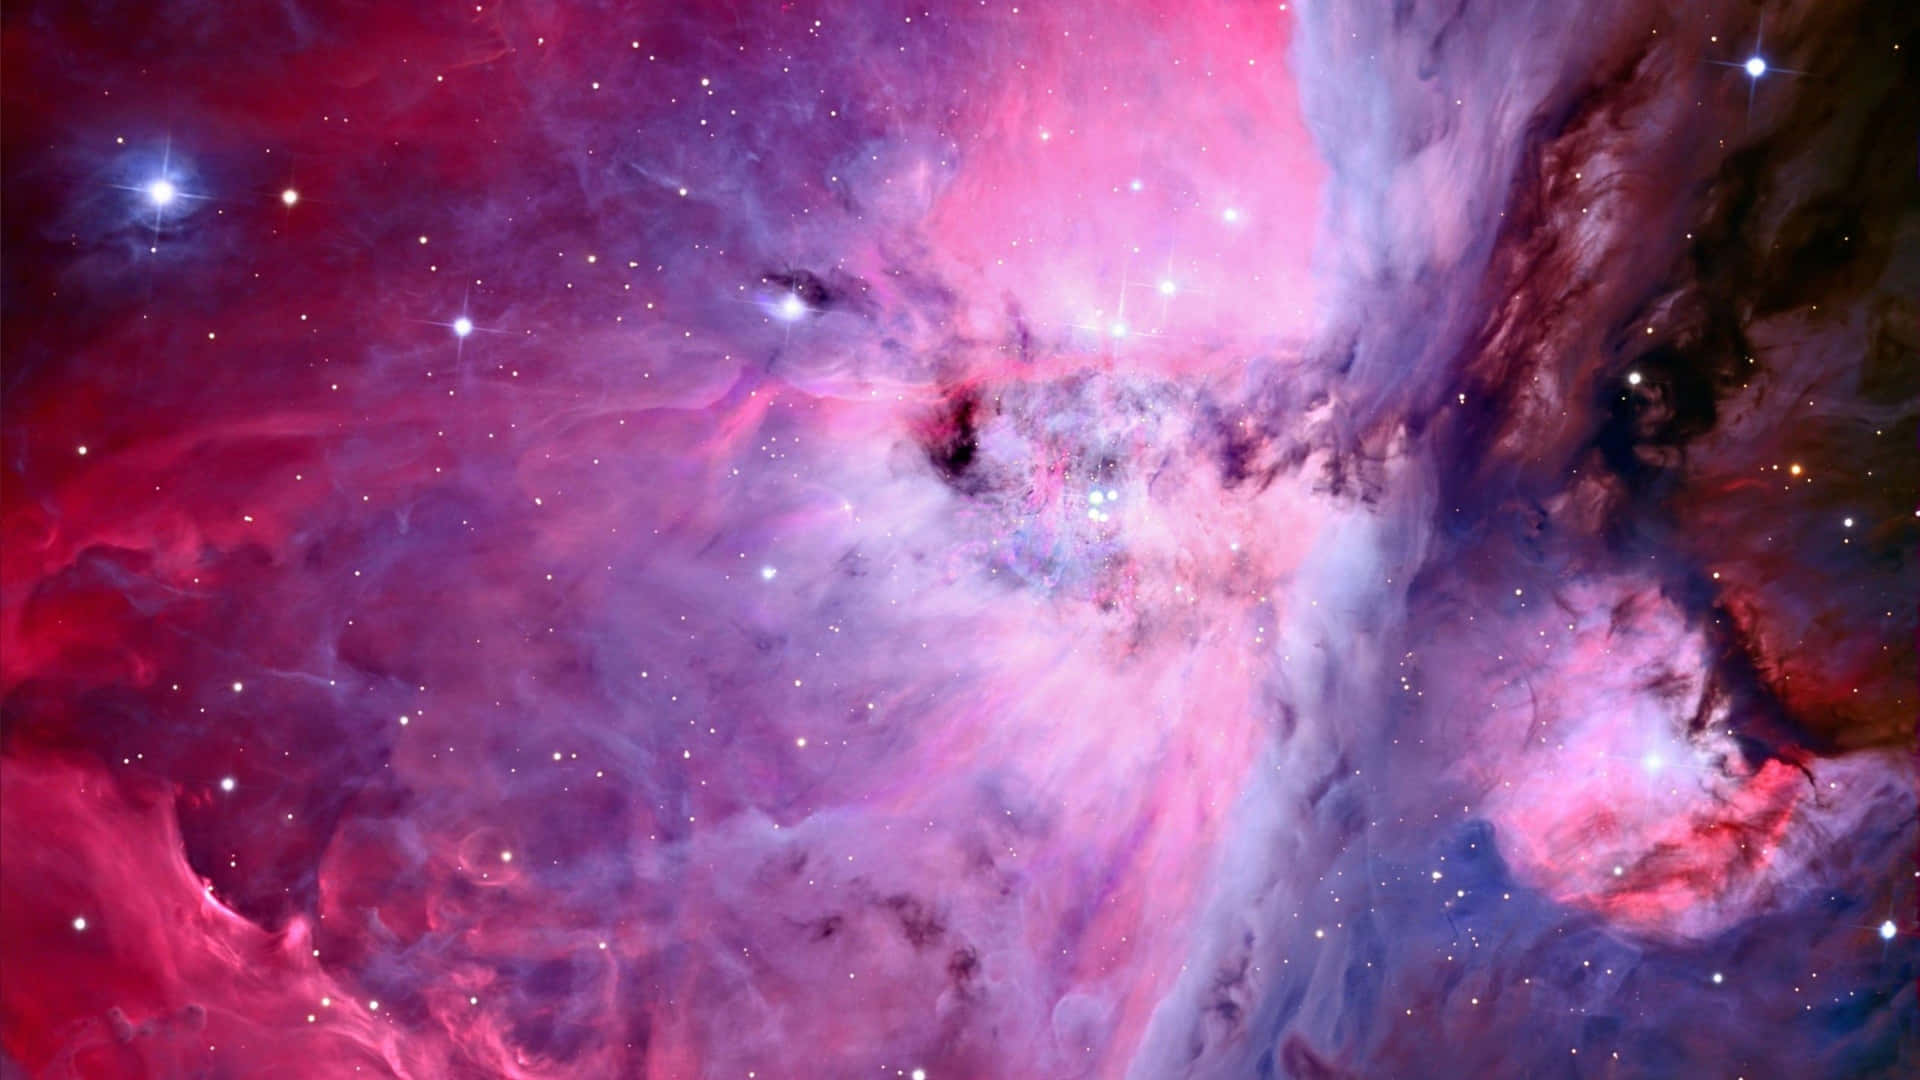 A stunning spiral galaxy in a bright pink and purple hue. Wallpaper